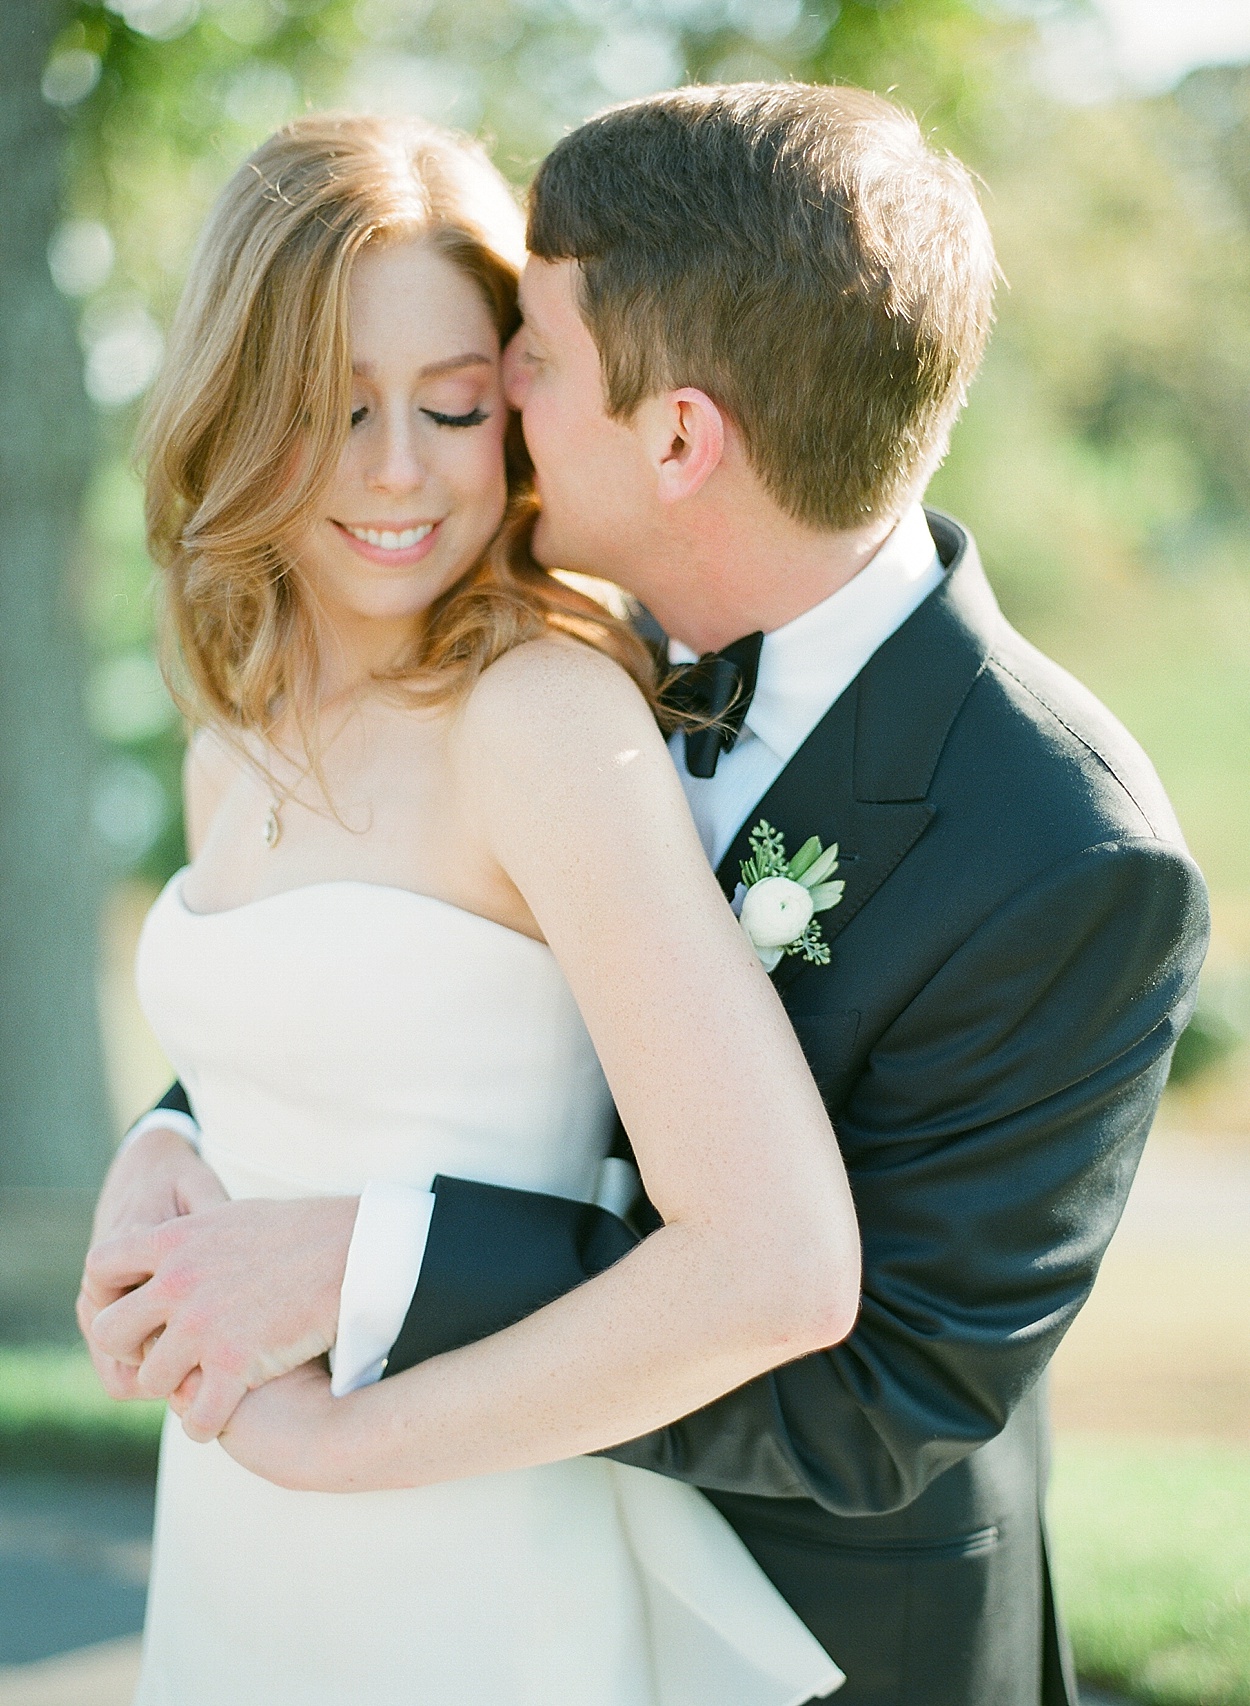 Congressional Country Club wedding | Abby Grace Photography